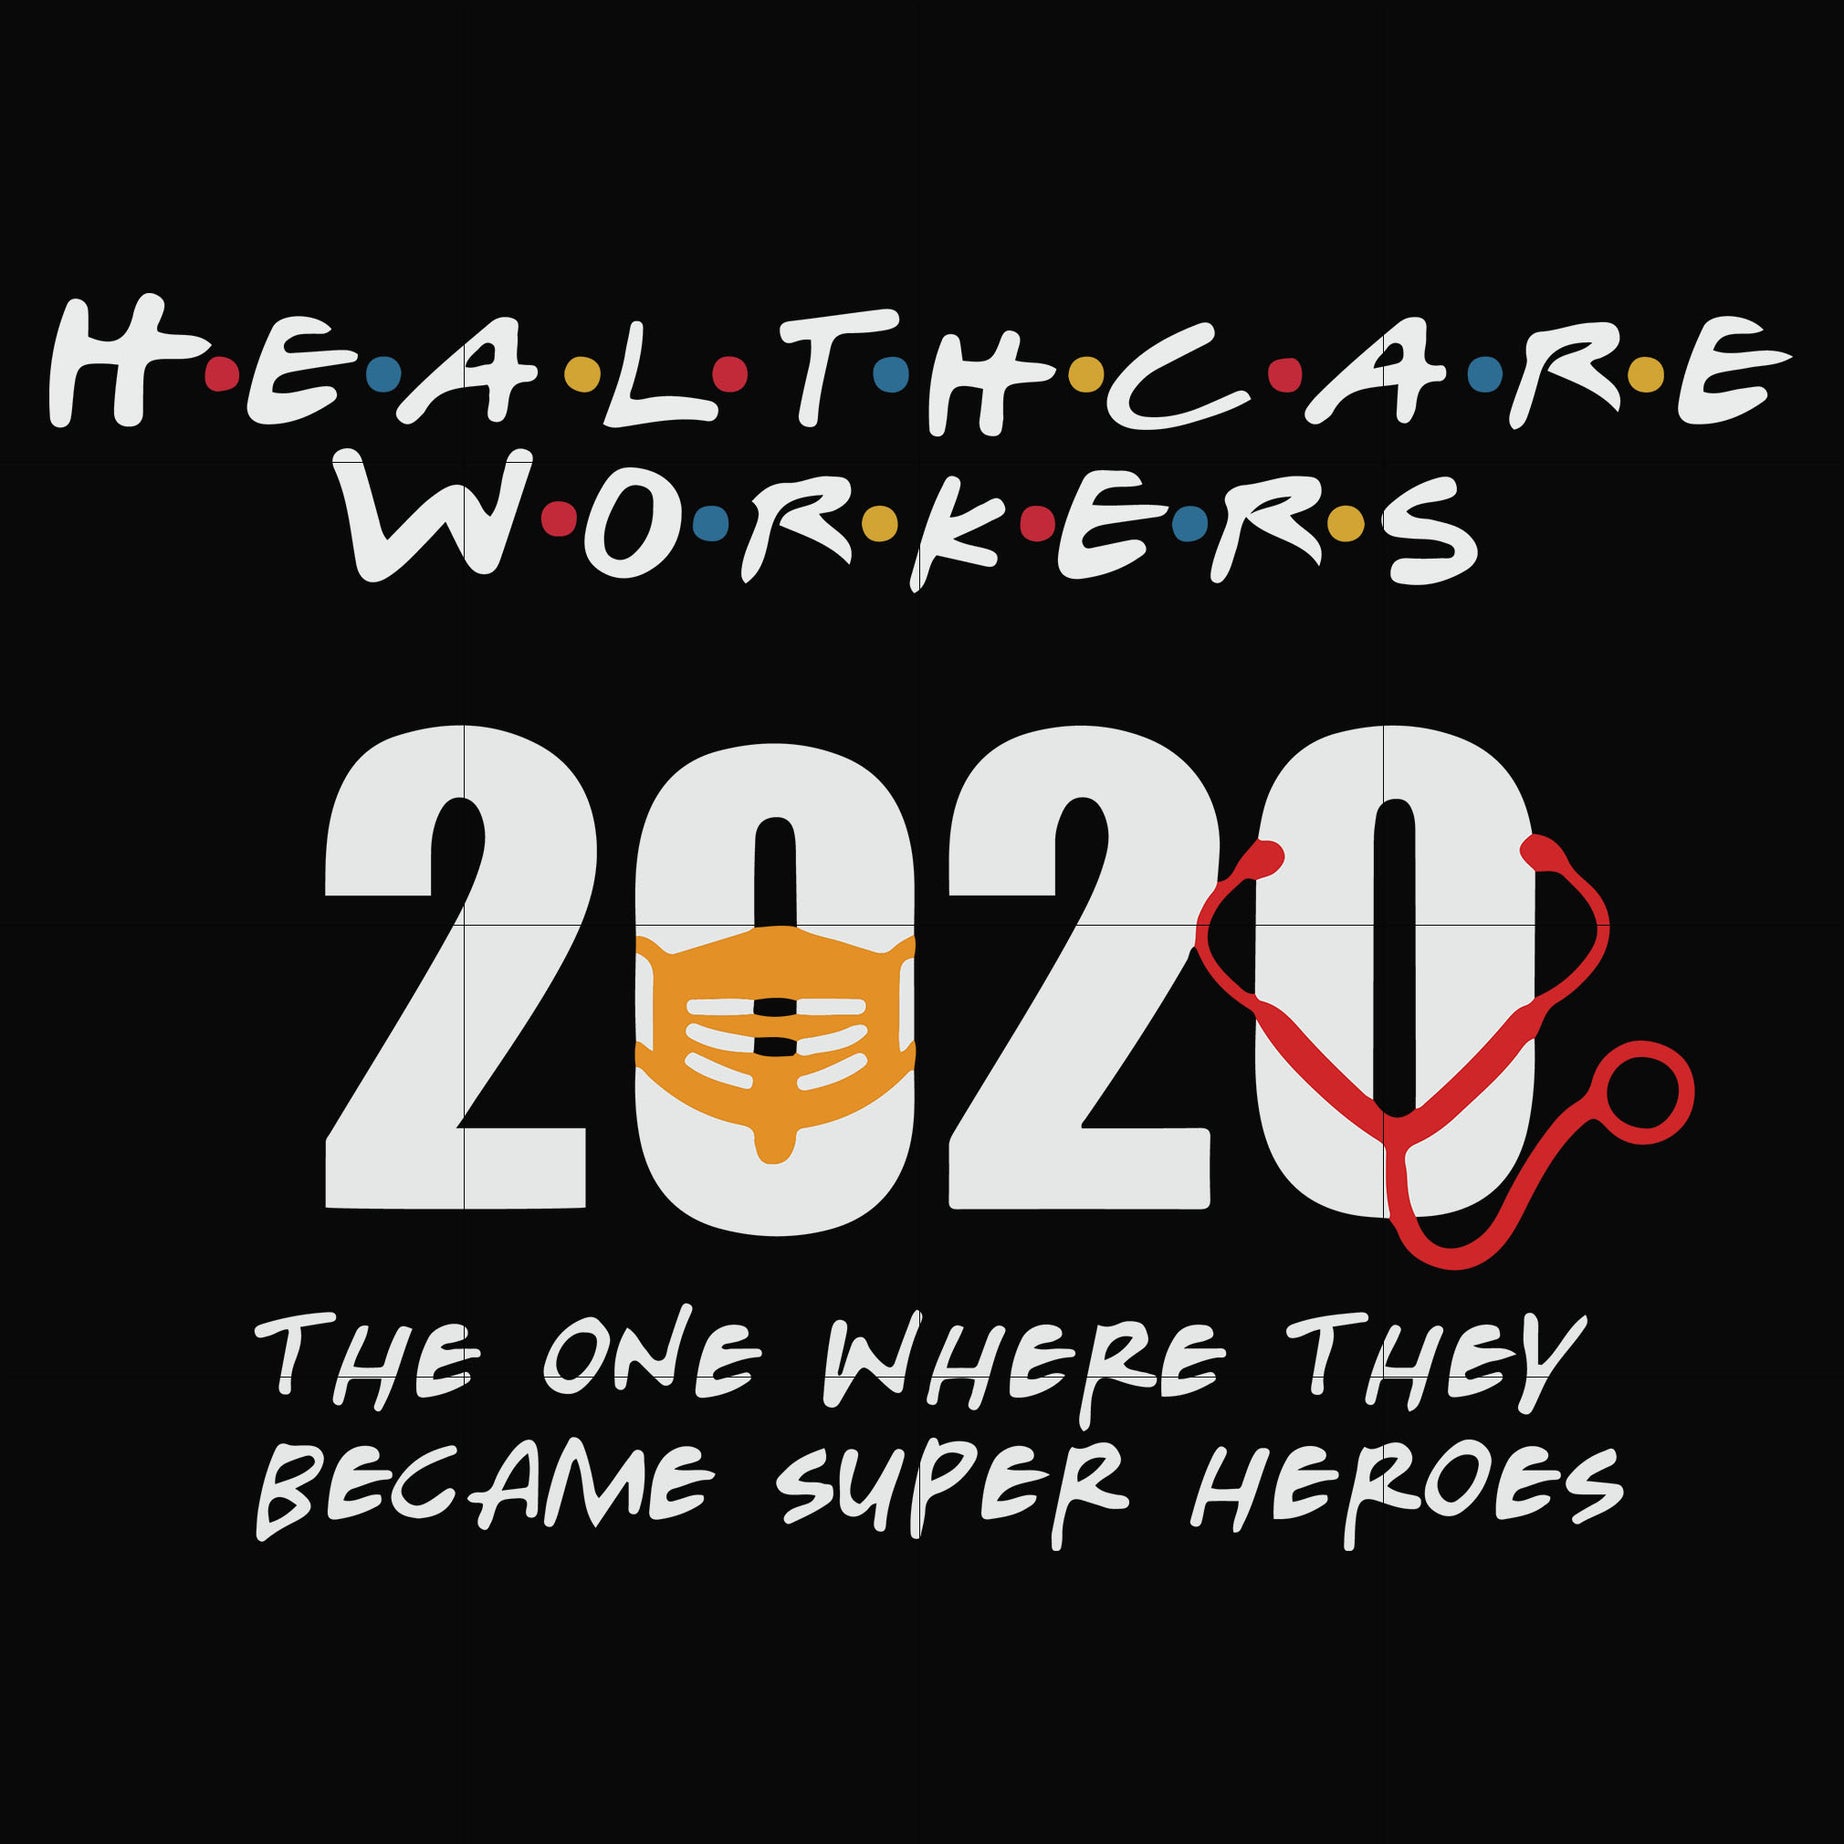 Healthcare workers 2020 the one where they became super heroes svg, png, dxf, eps file FN0001010